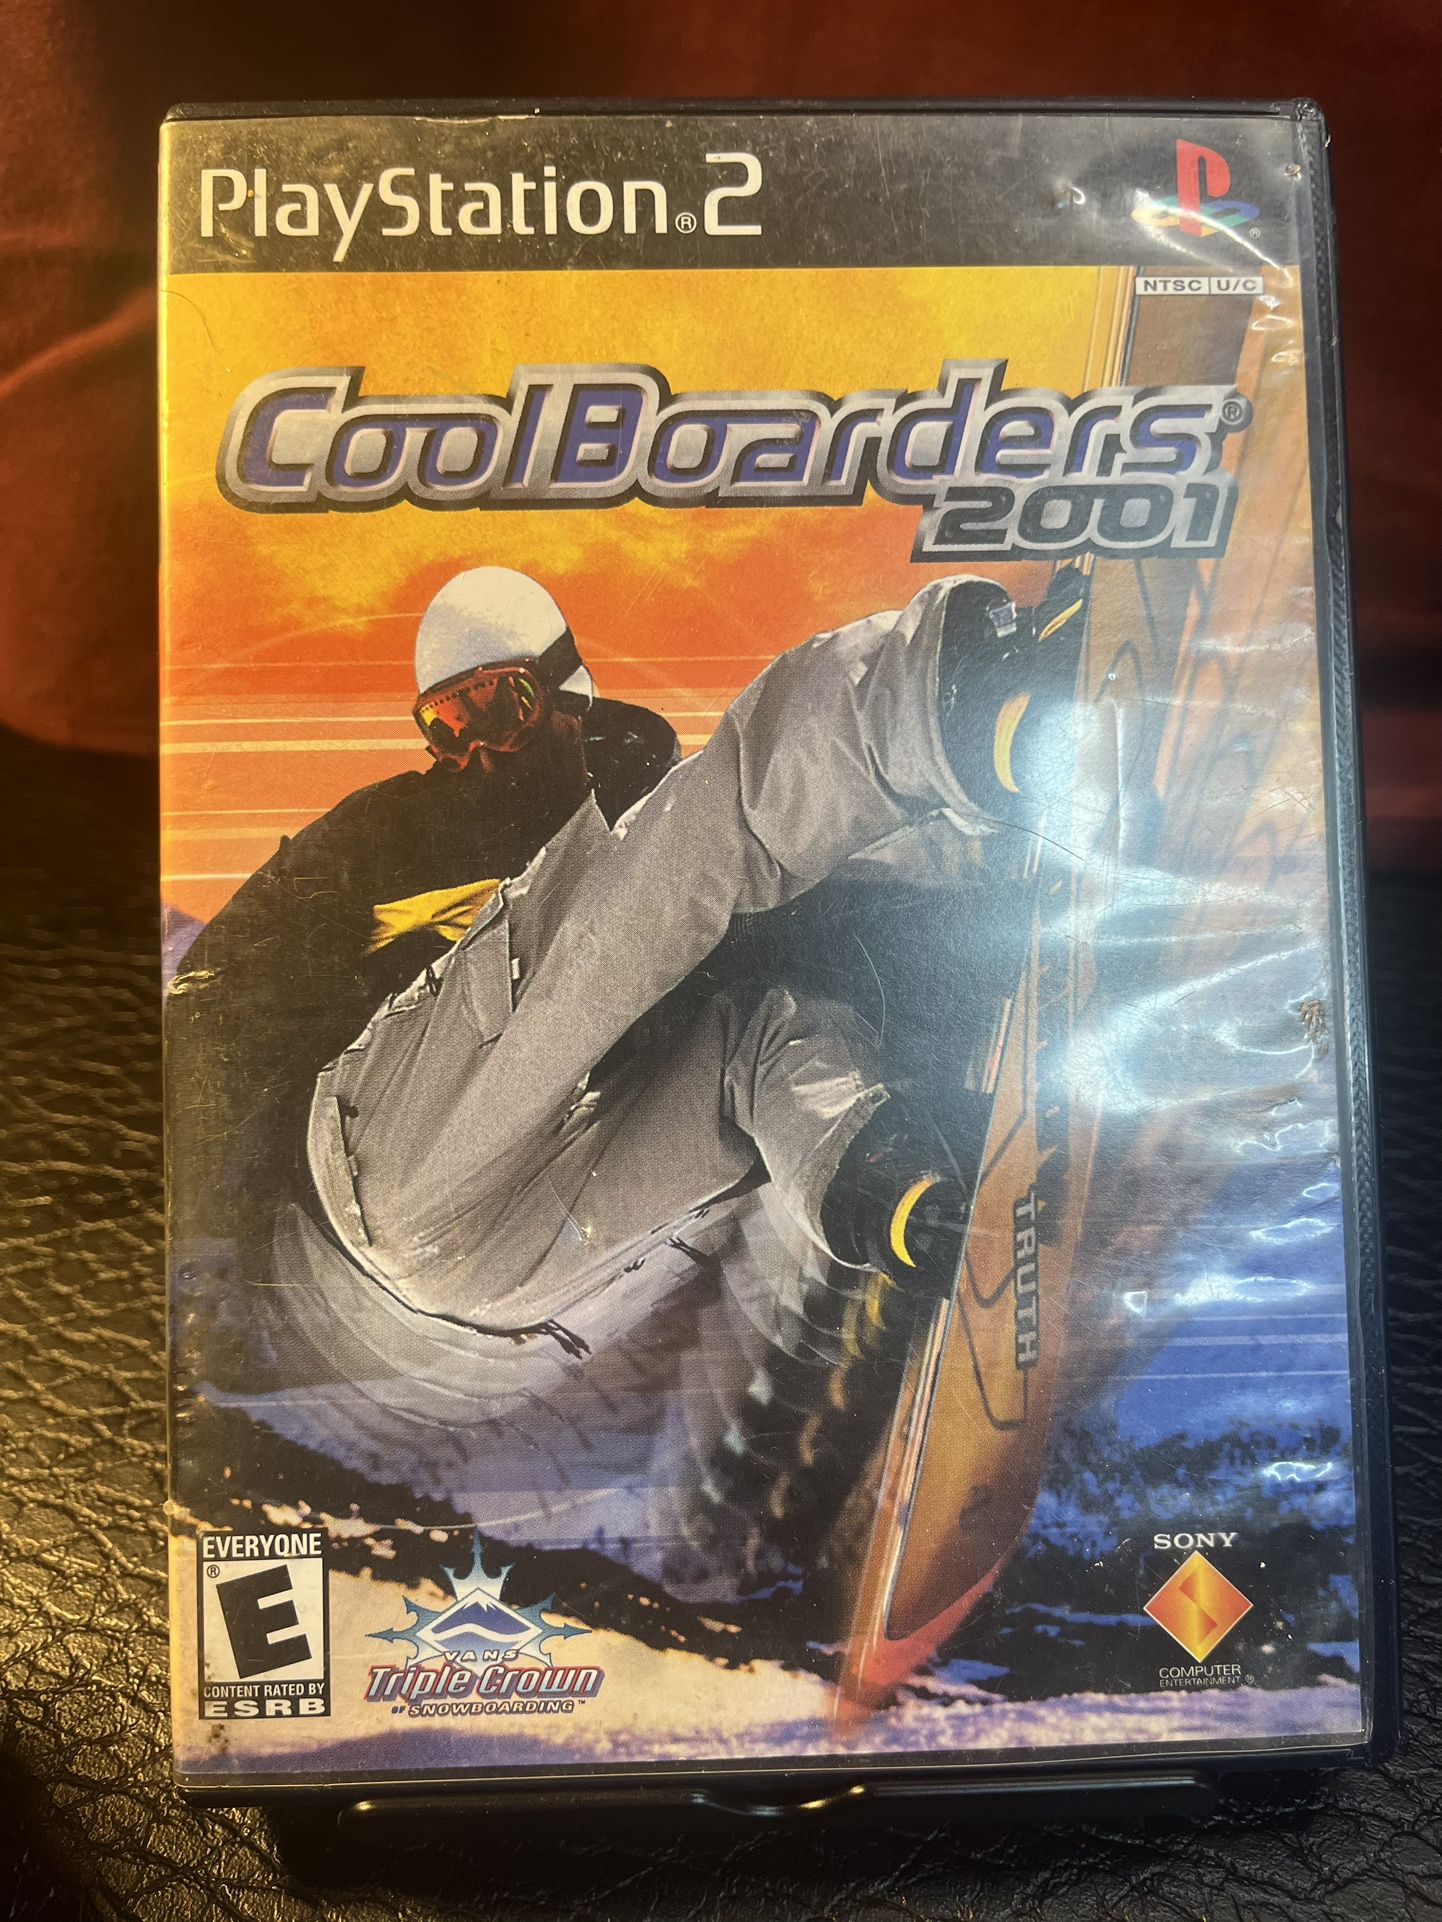 CoolBoarders 2001 PS2